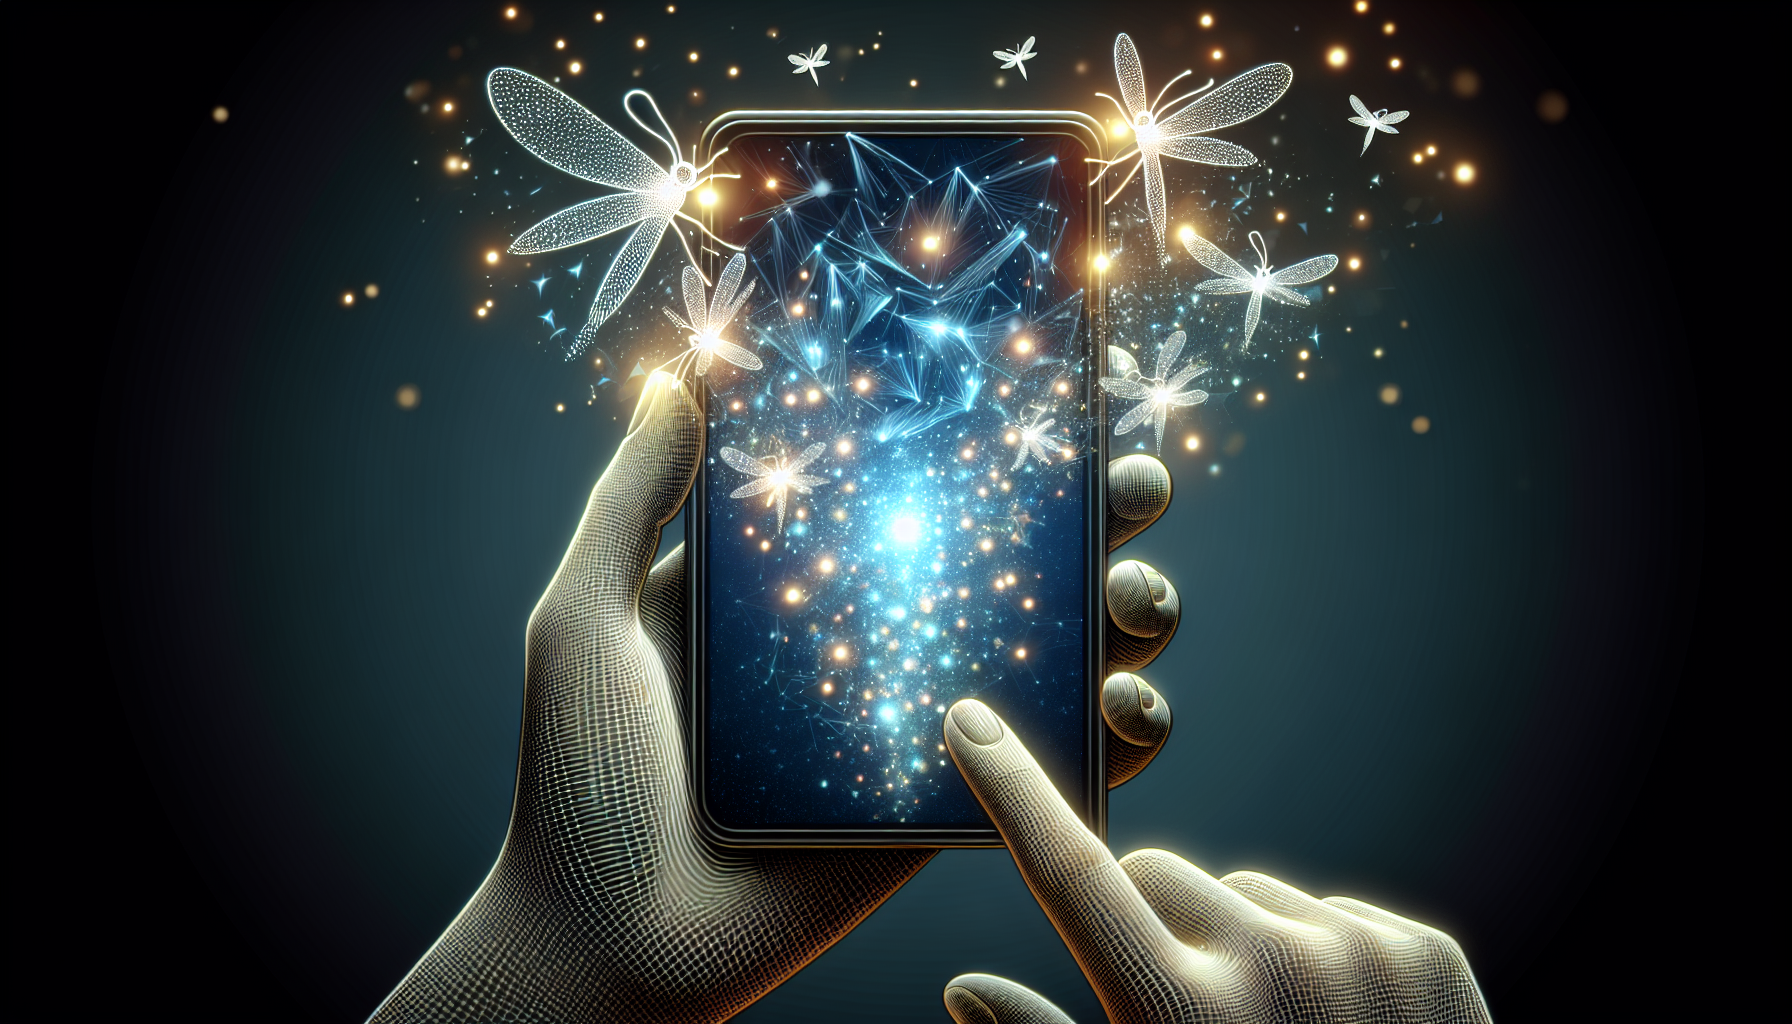 For the first time, Adobe has launched Firefly generative AI on mobile via Express.